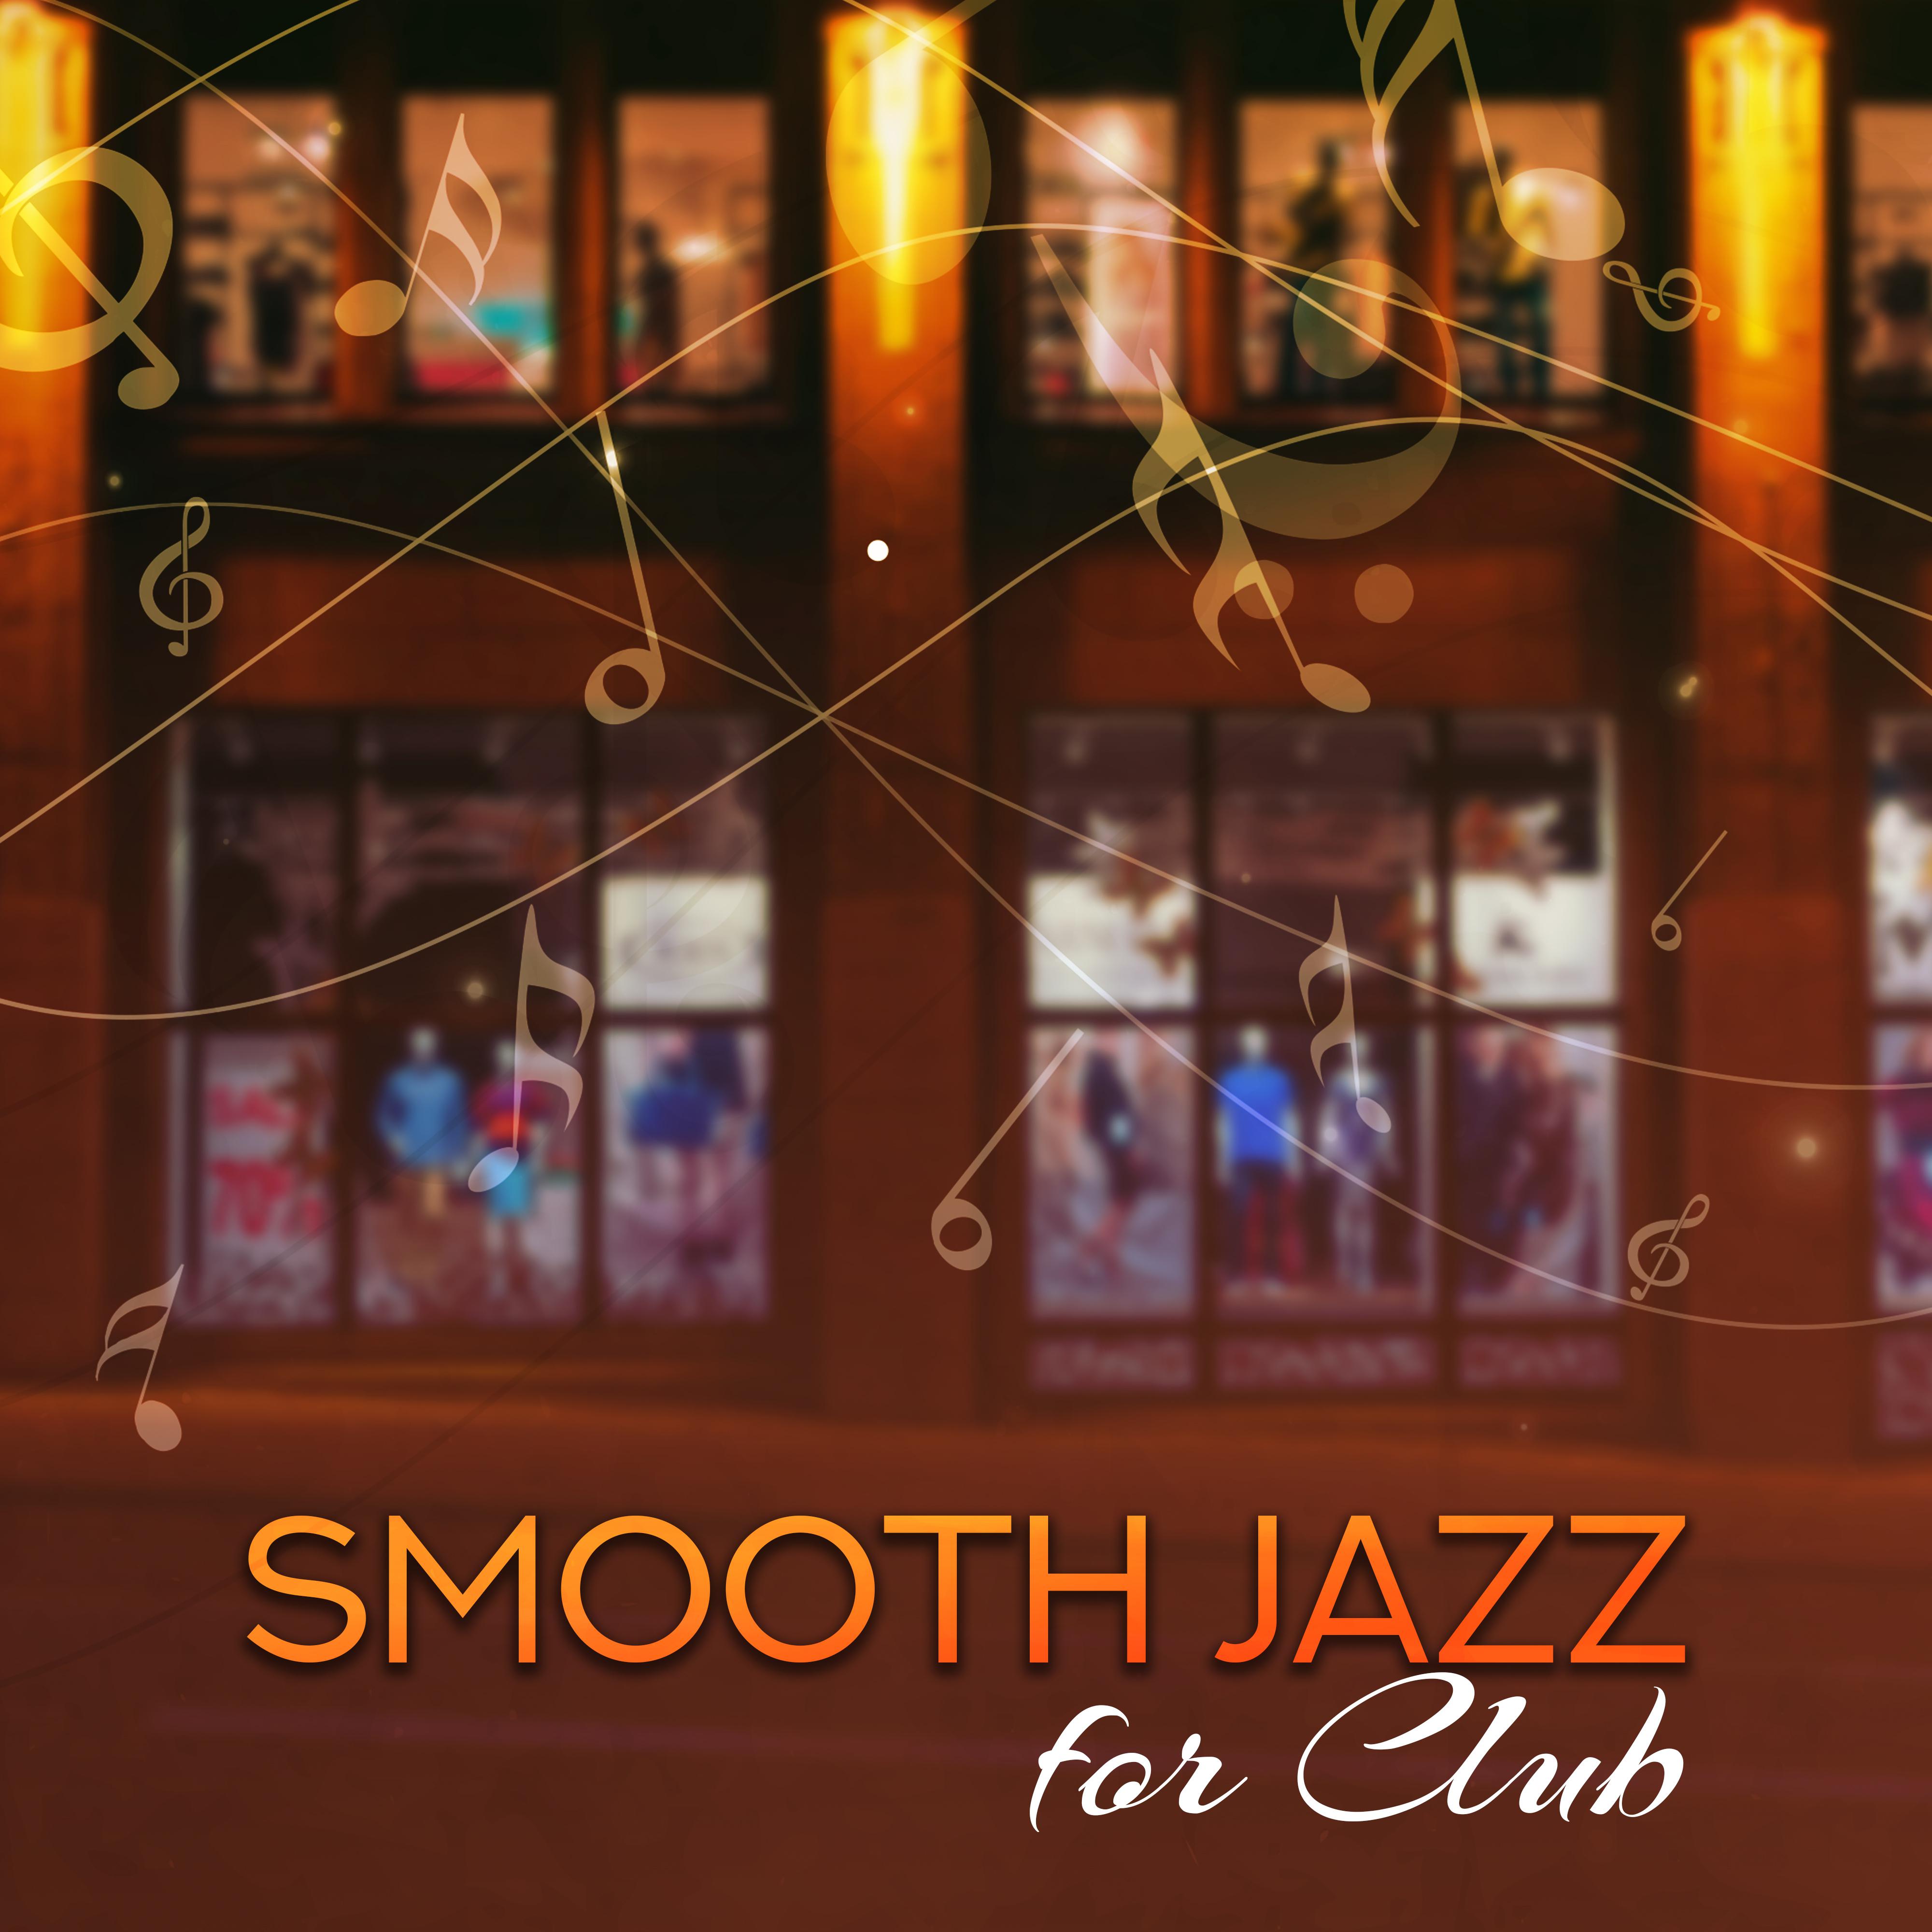 Smooth Jazz for Club  Easy Listening, Calm Music, Jazz Club, Evening Relaxation